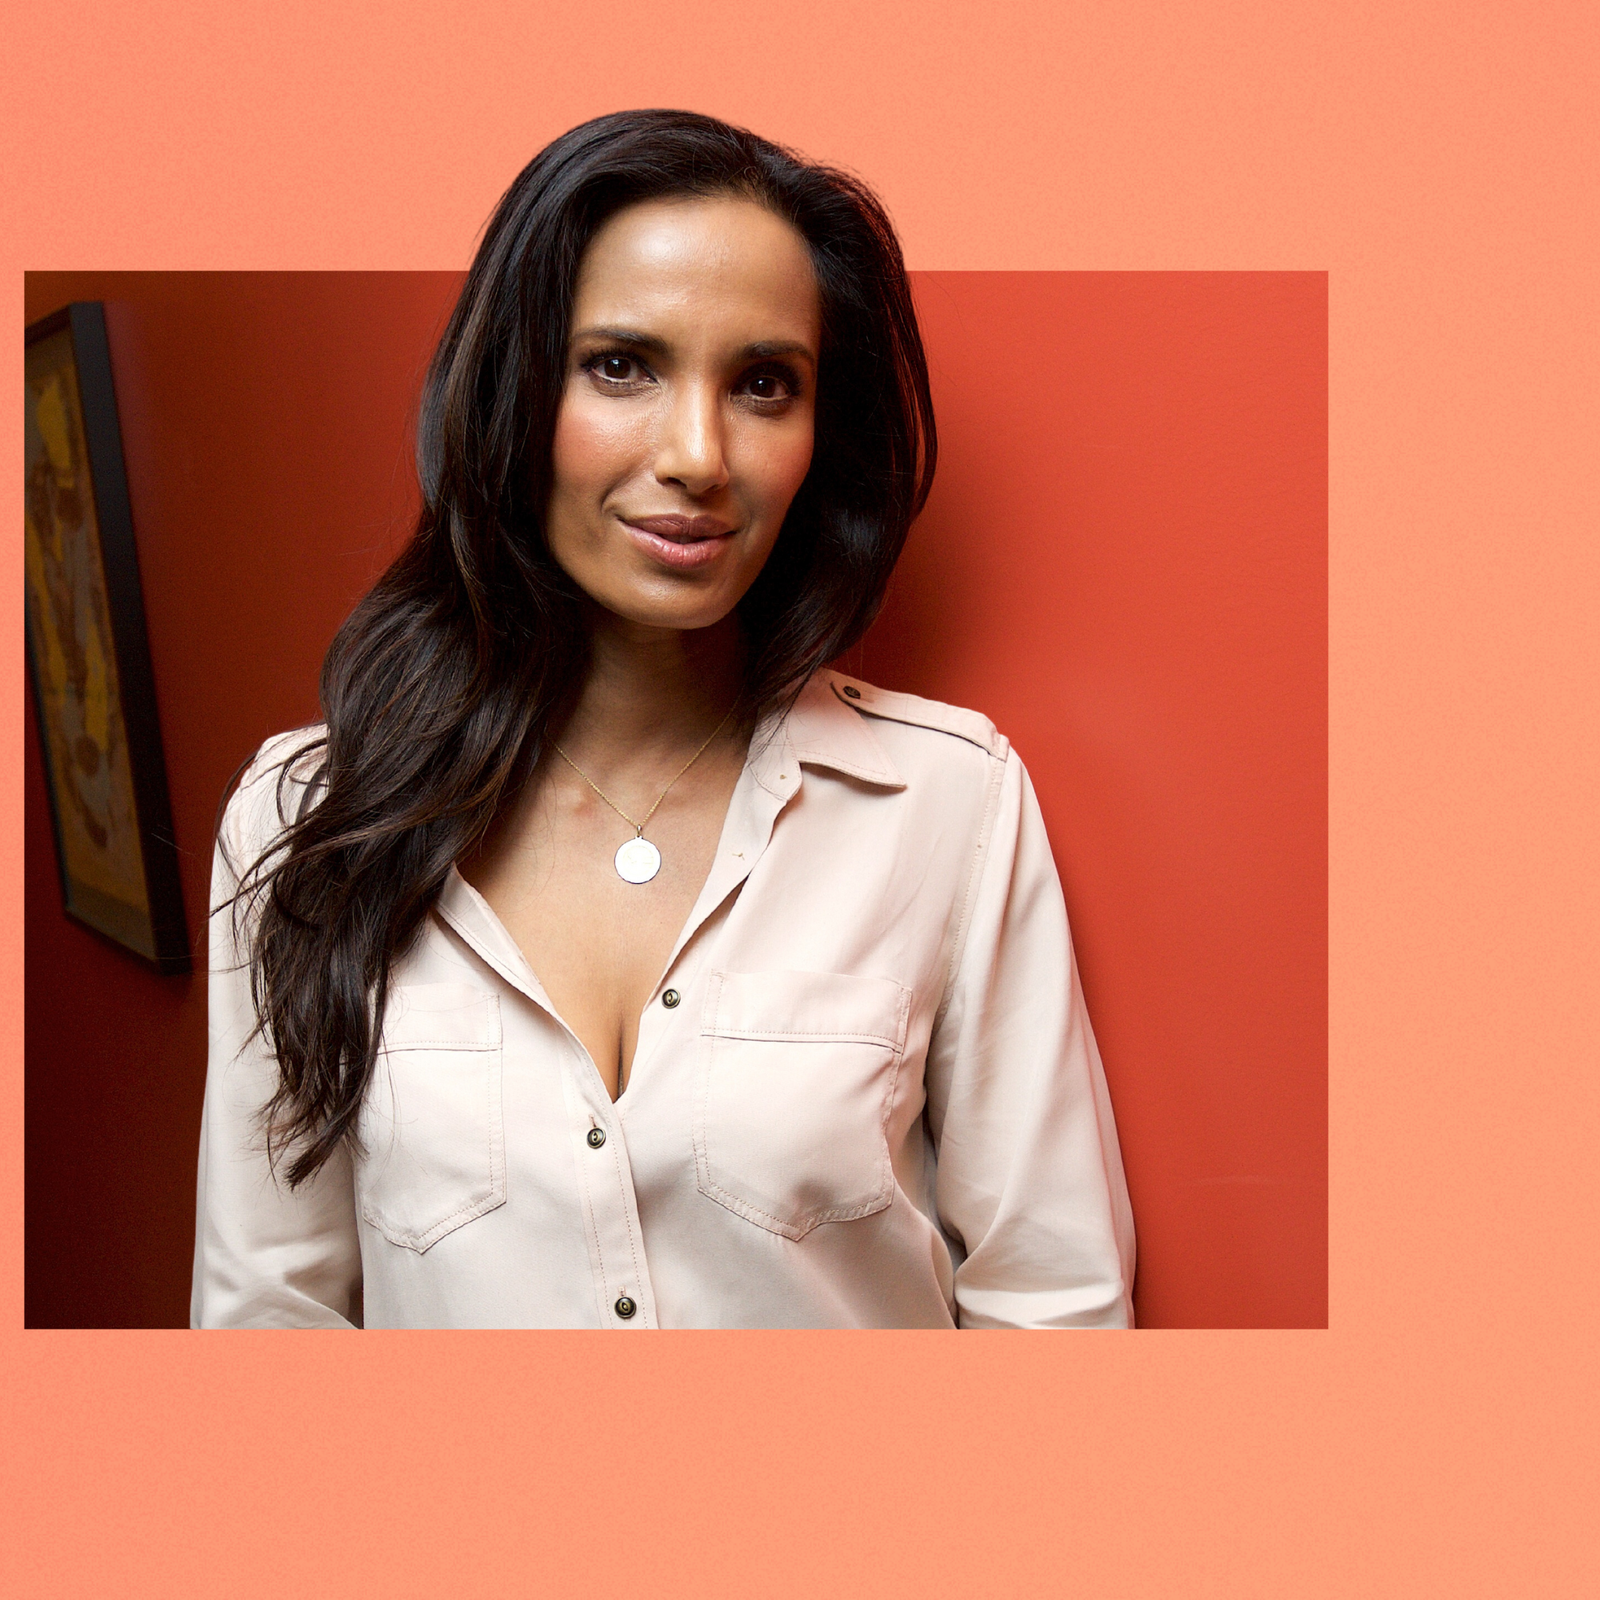 The Simple Meal Padma Lakshmi Eats When She Just Needs to Relax